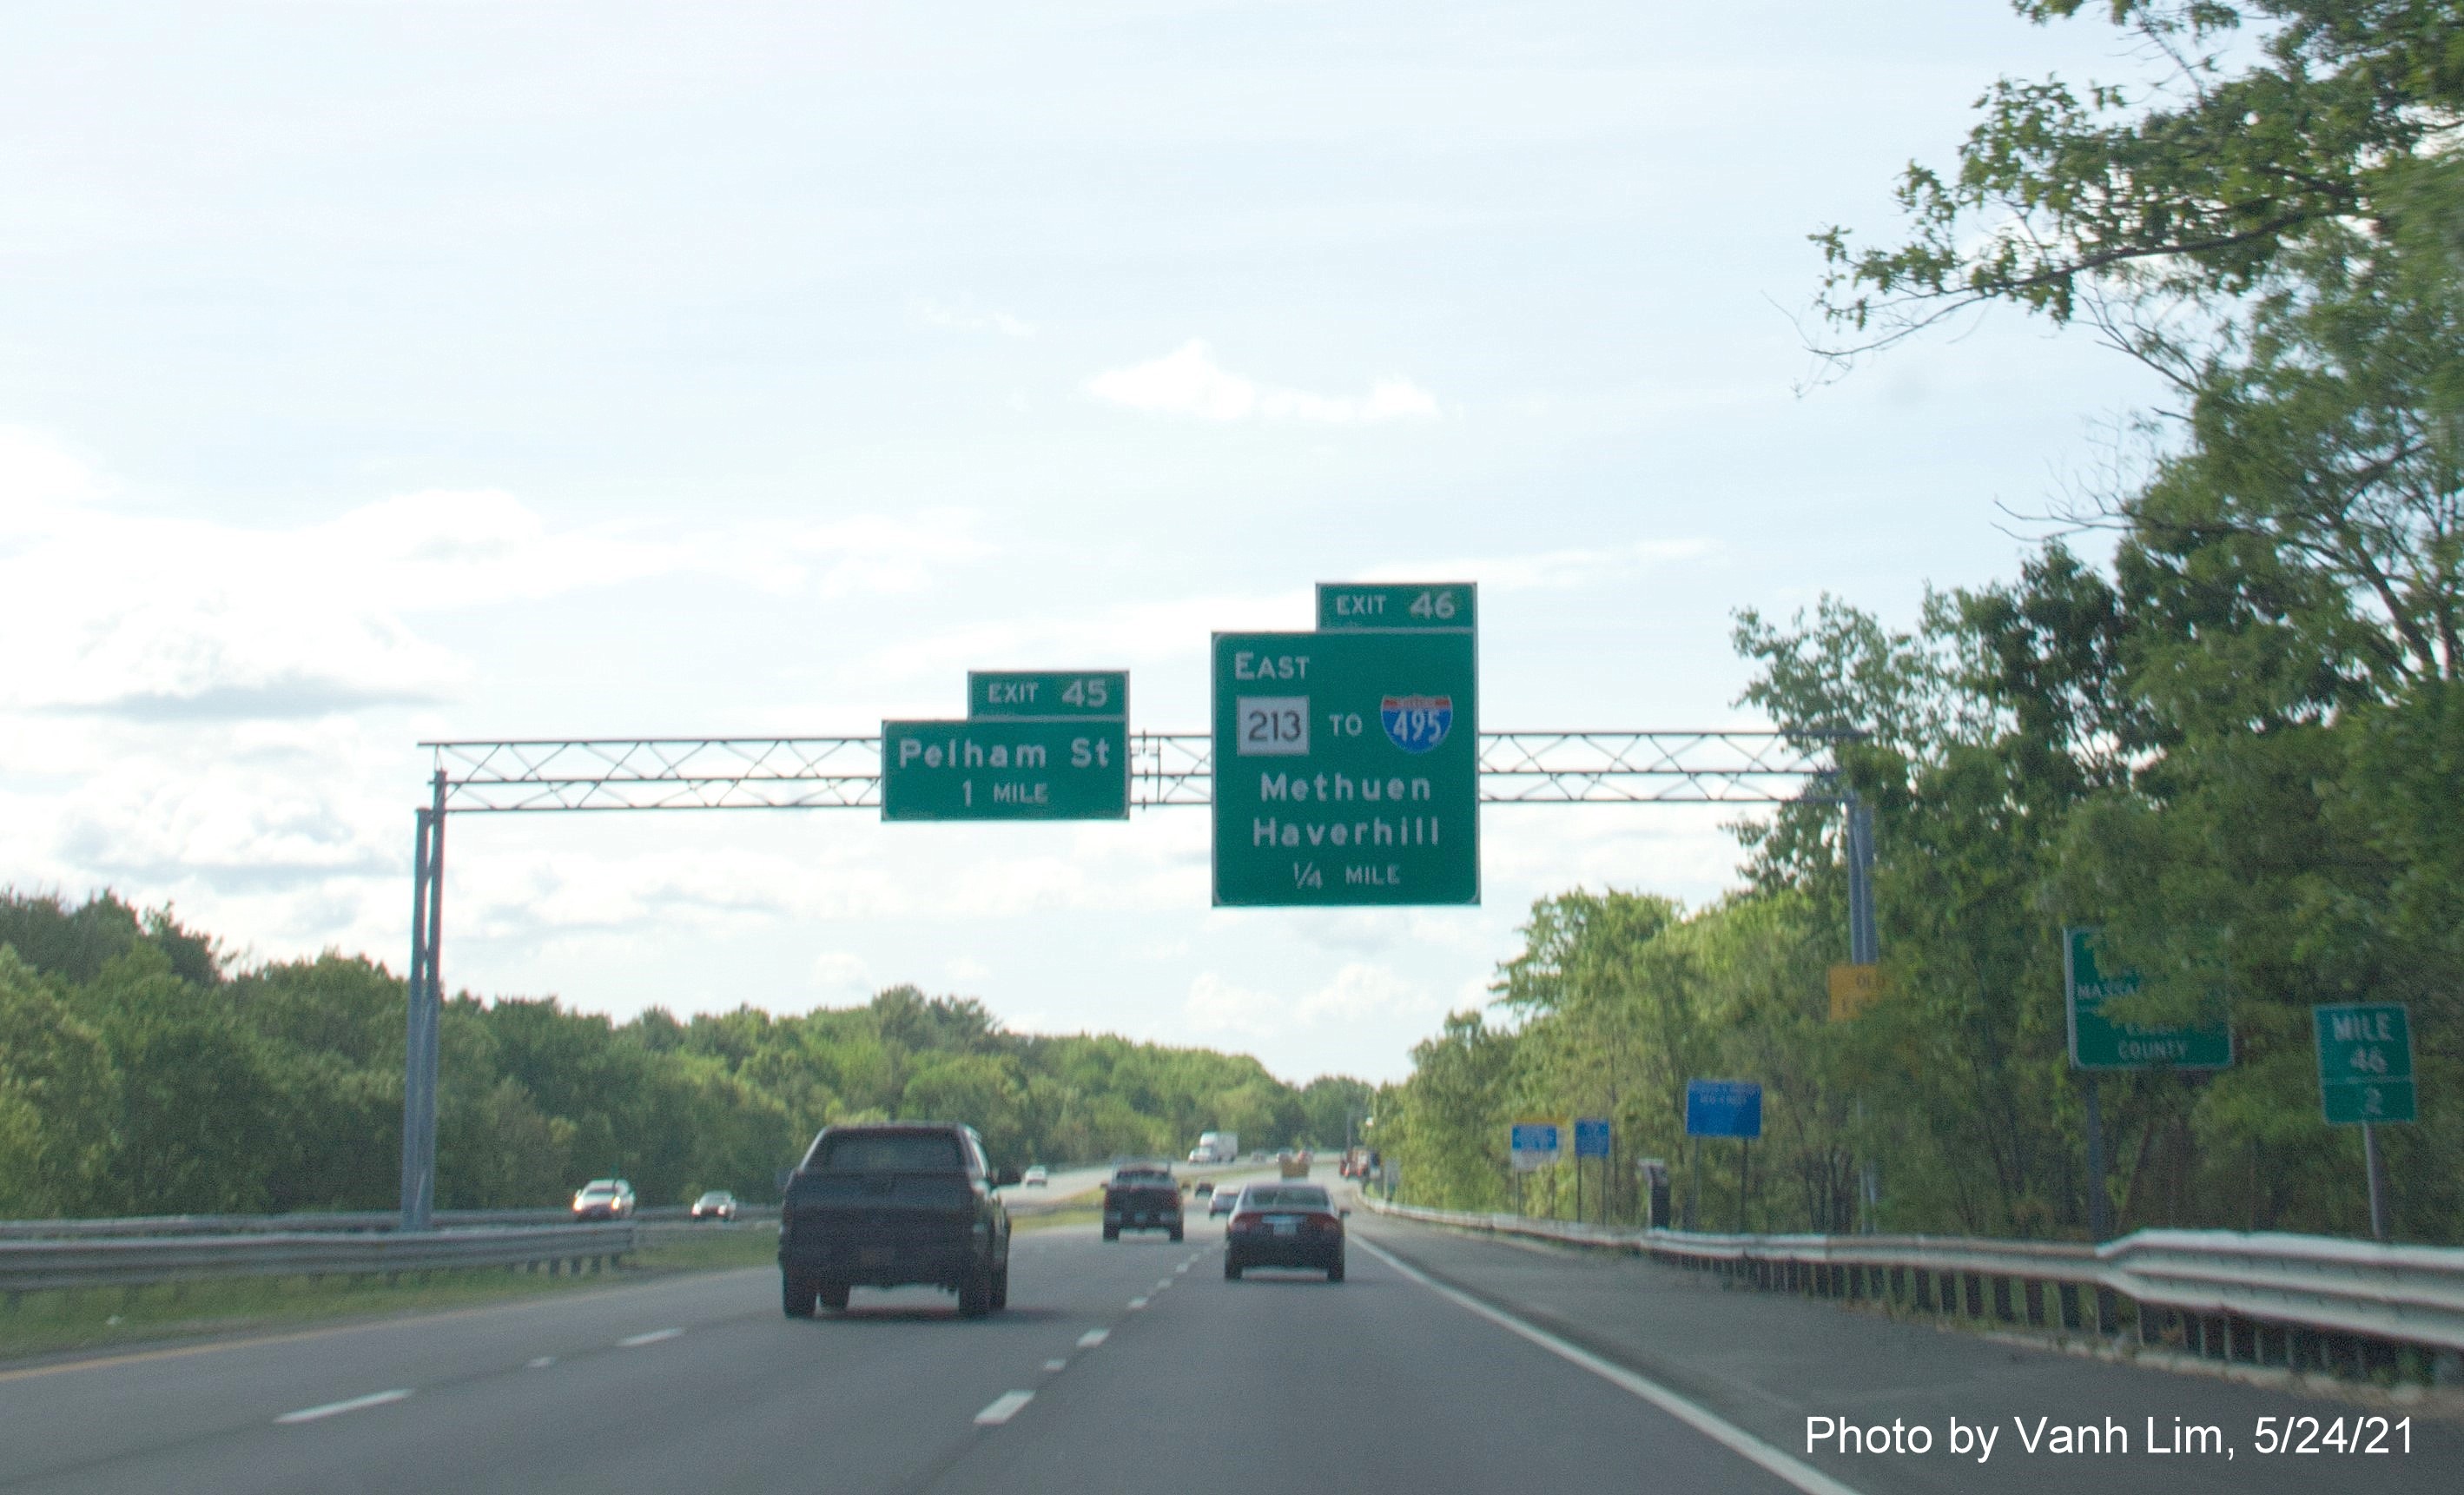 Image of 1 mile advance overhead sign for Pelham Road exit with new milepost based exit number on I-93 South in Methuen, by Vinh Lam, May 2021